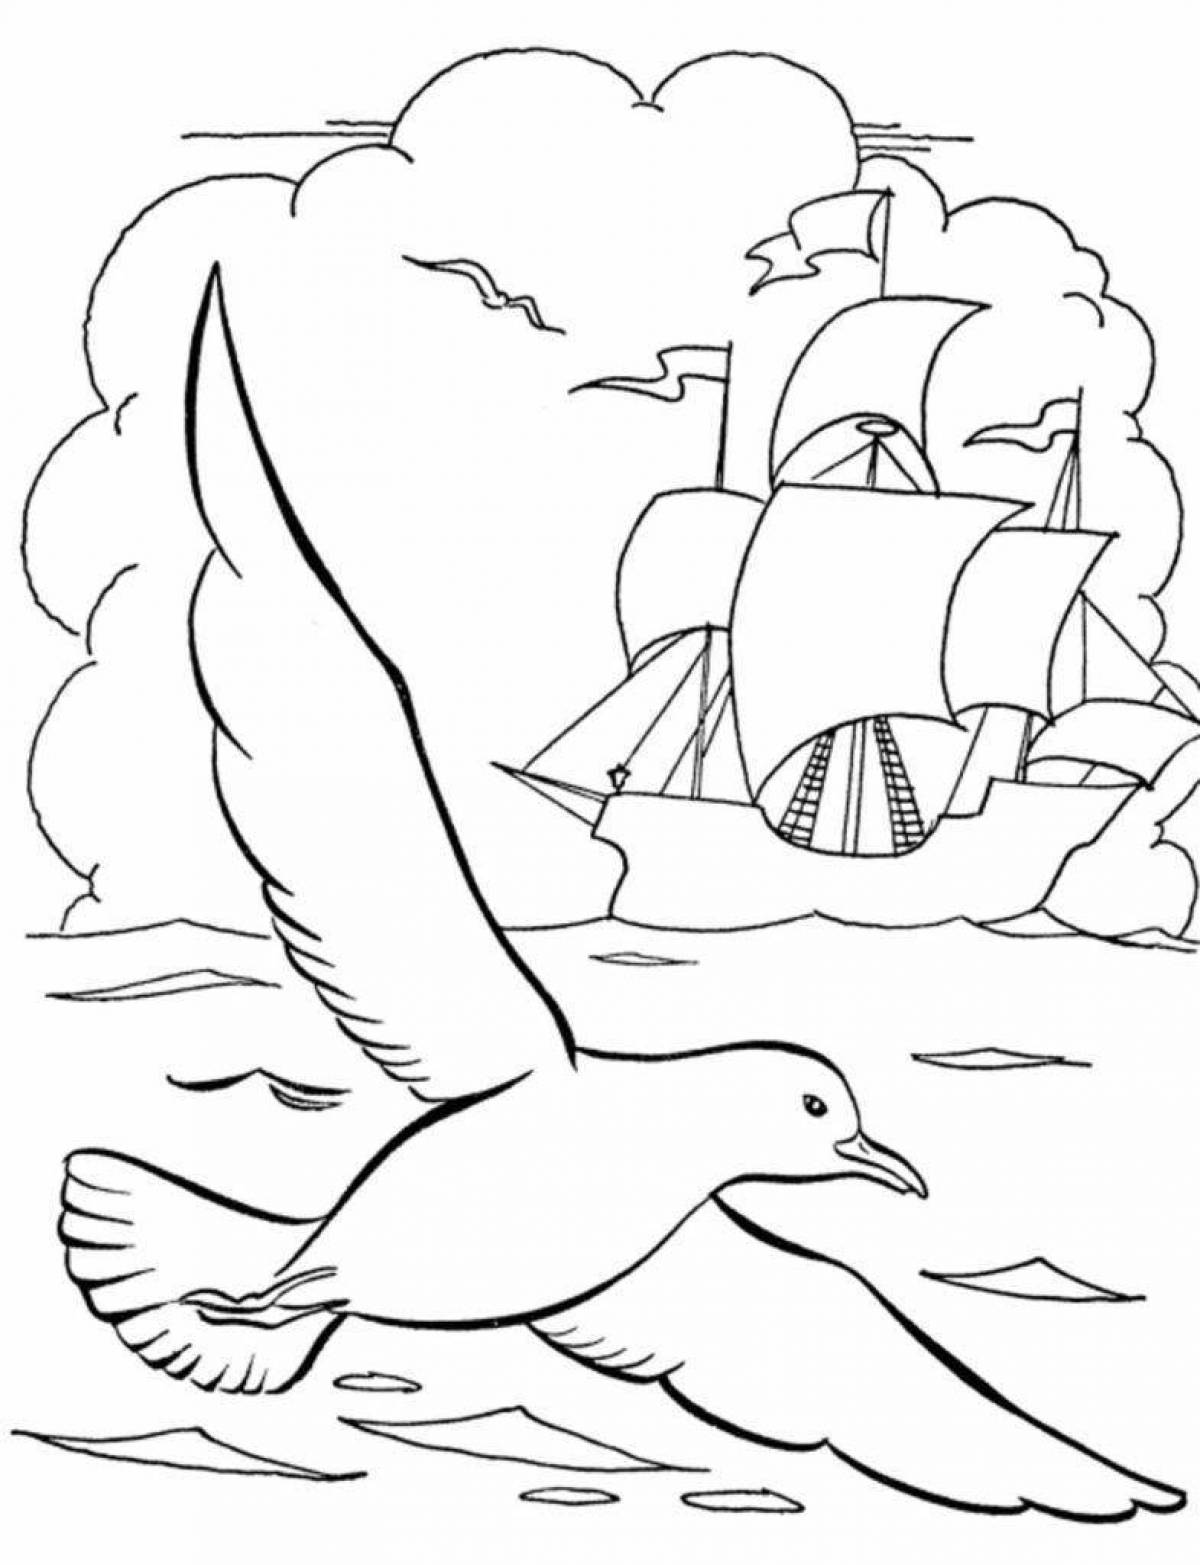 Amazing Crimea coloring pages for kids